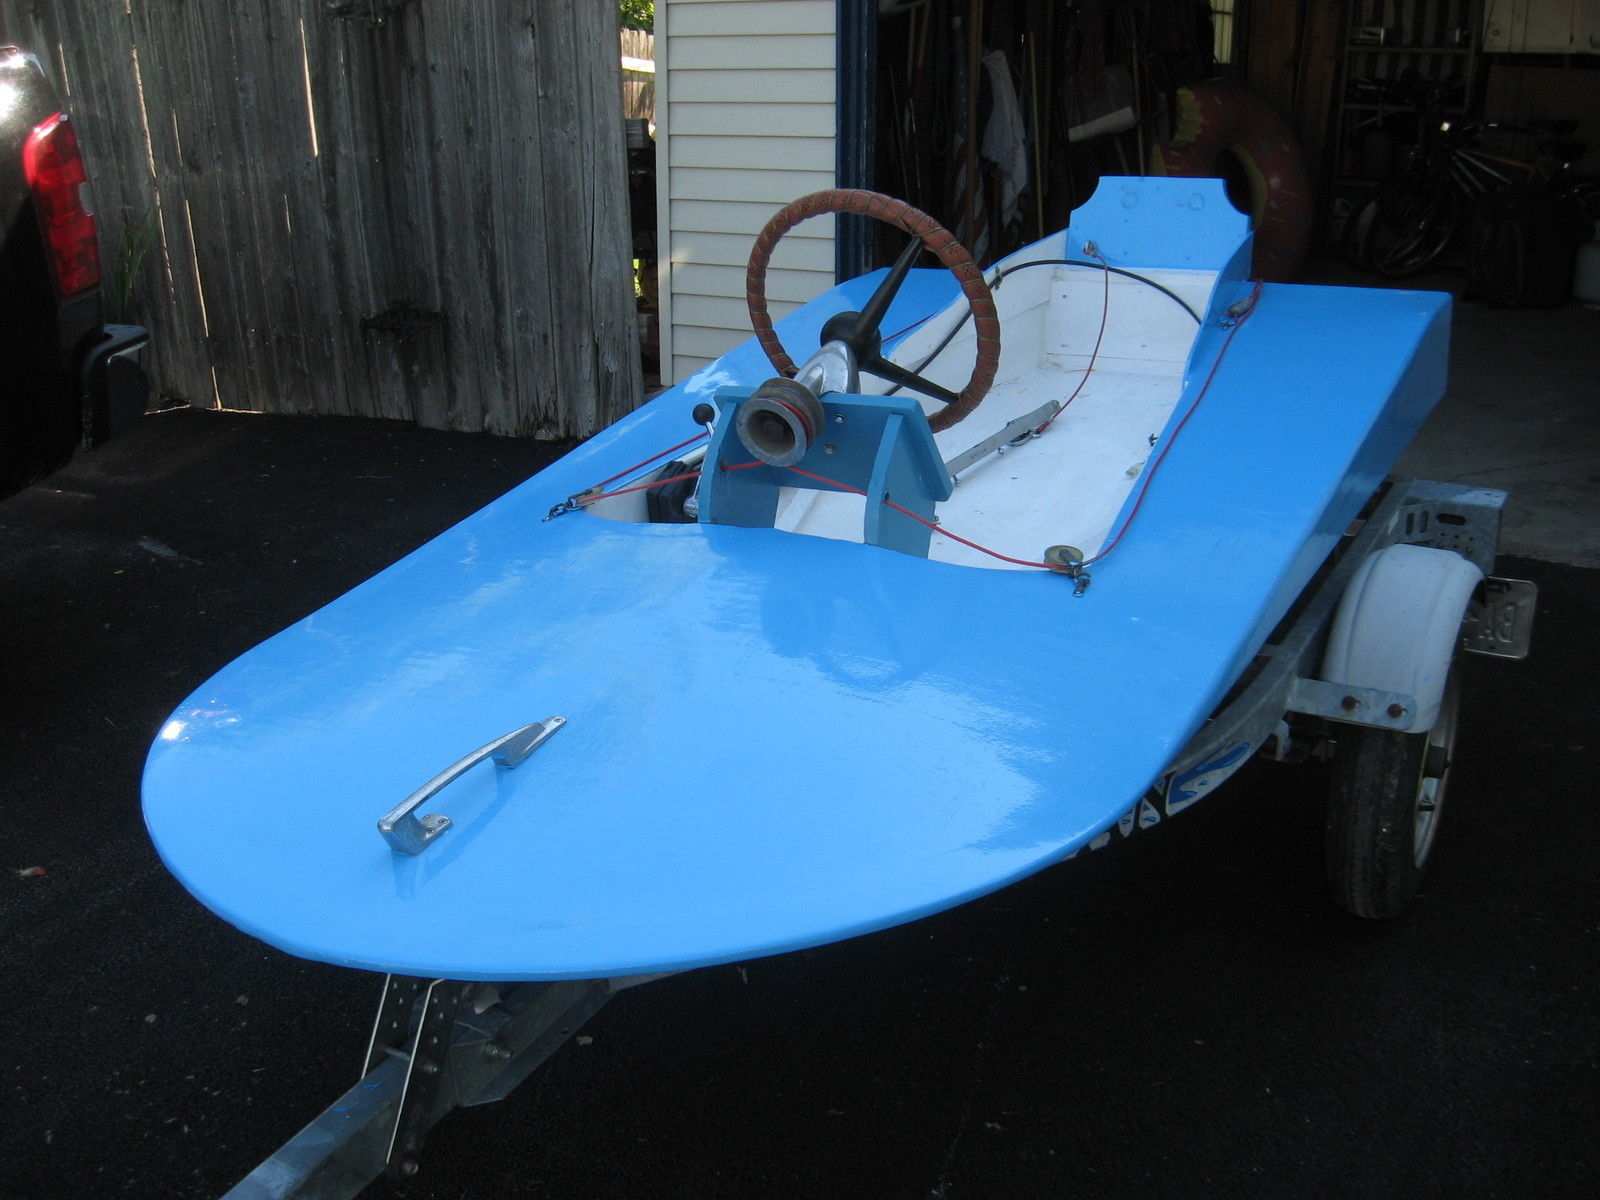 Home Built Mini Max Hydroplane 2010 for sale for $350 